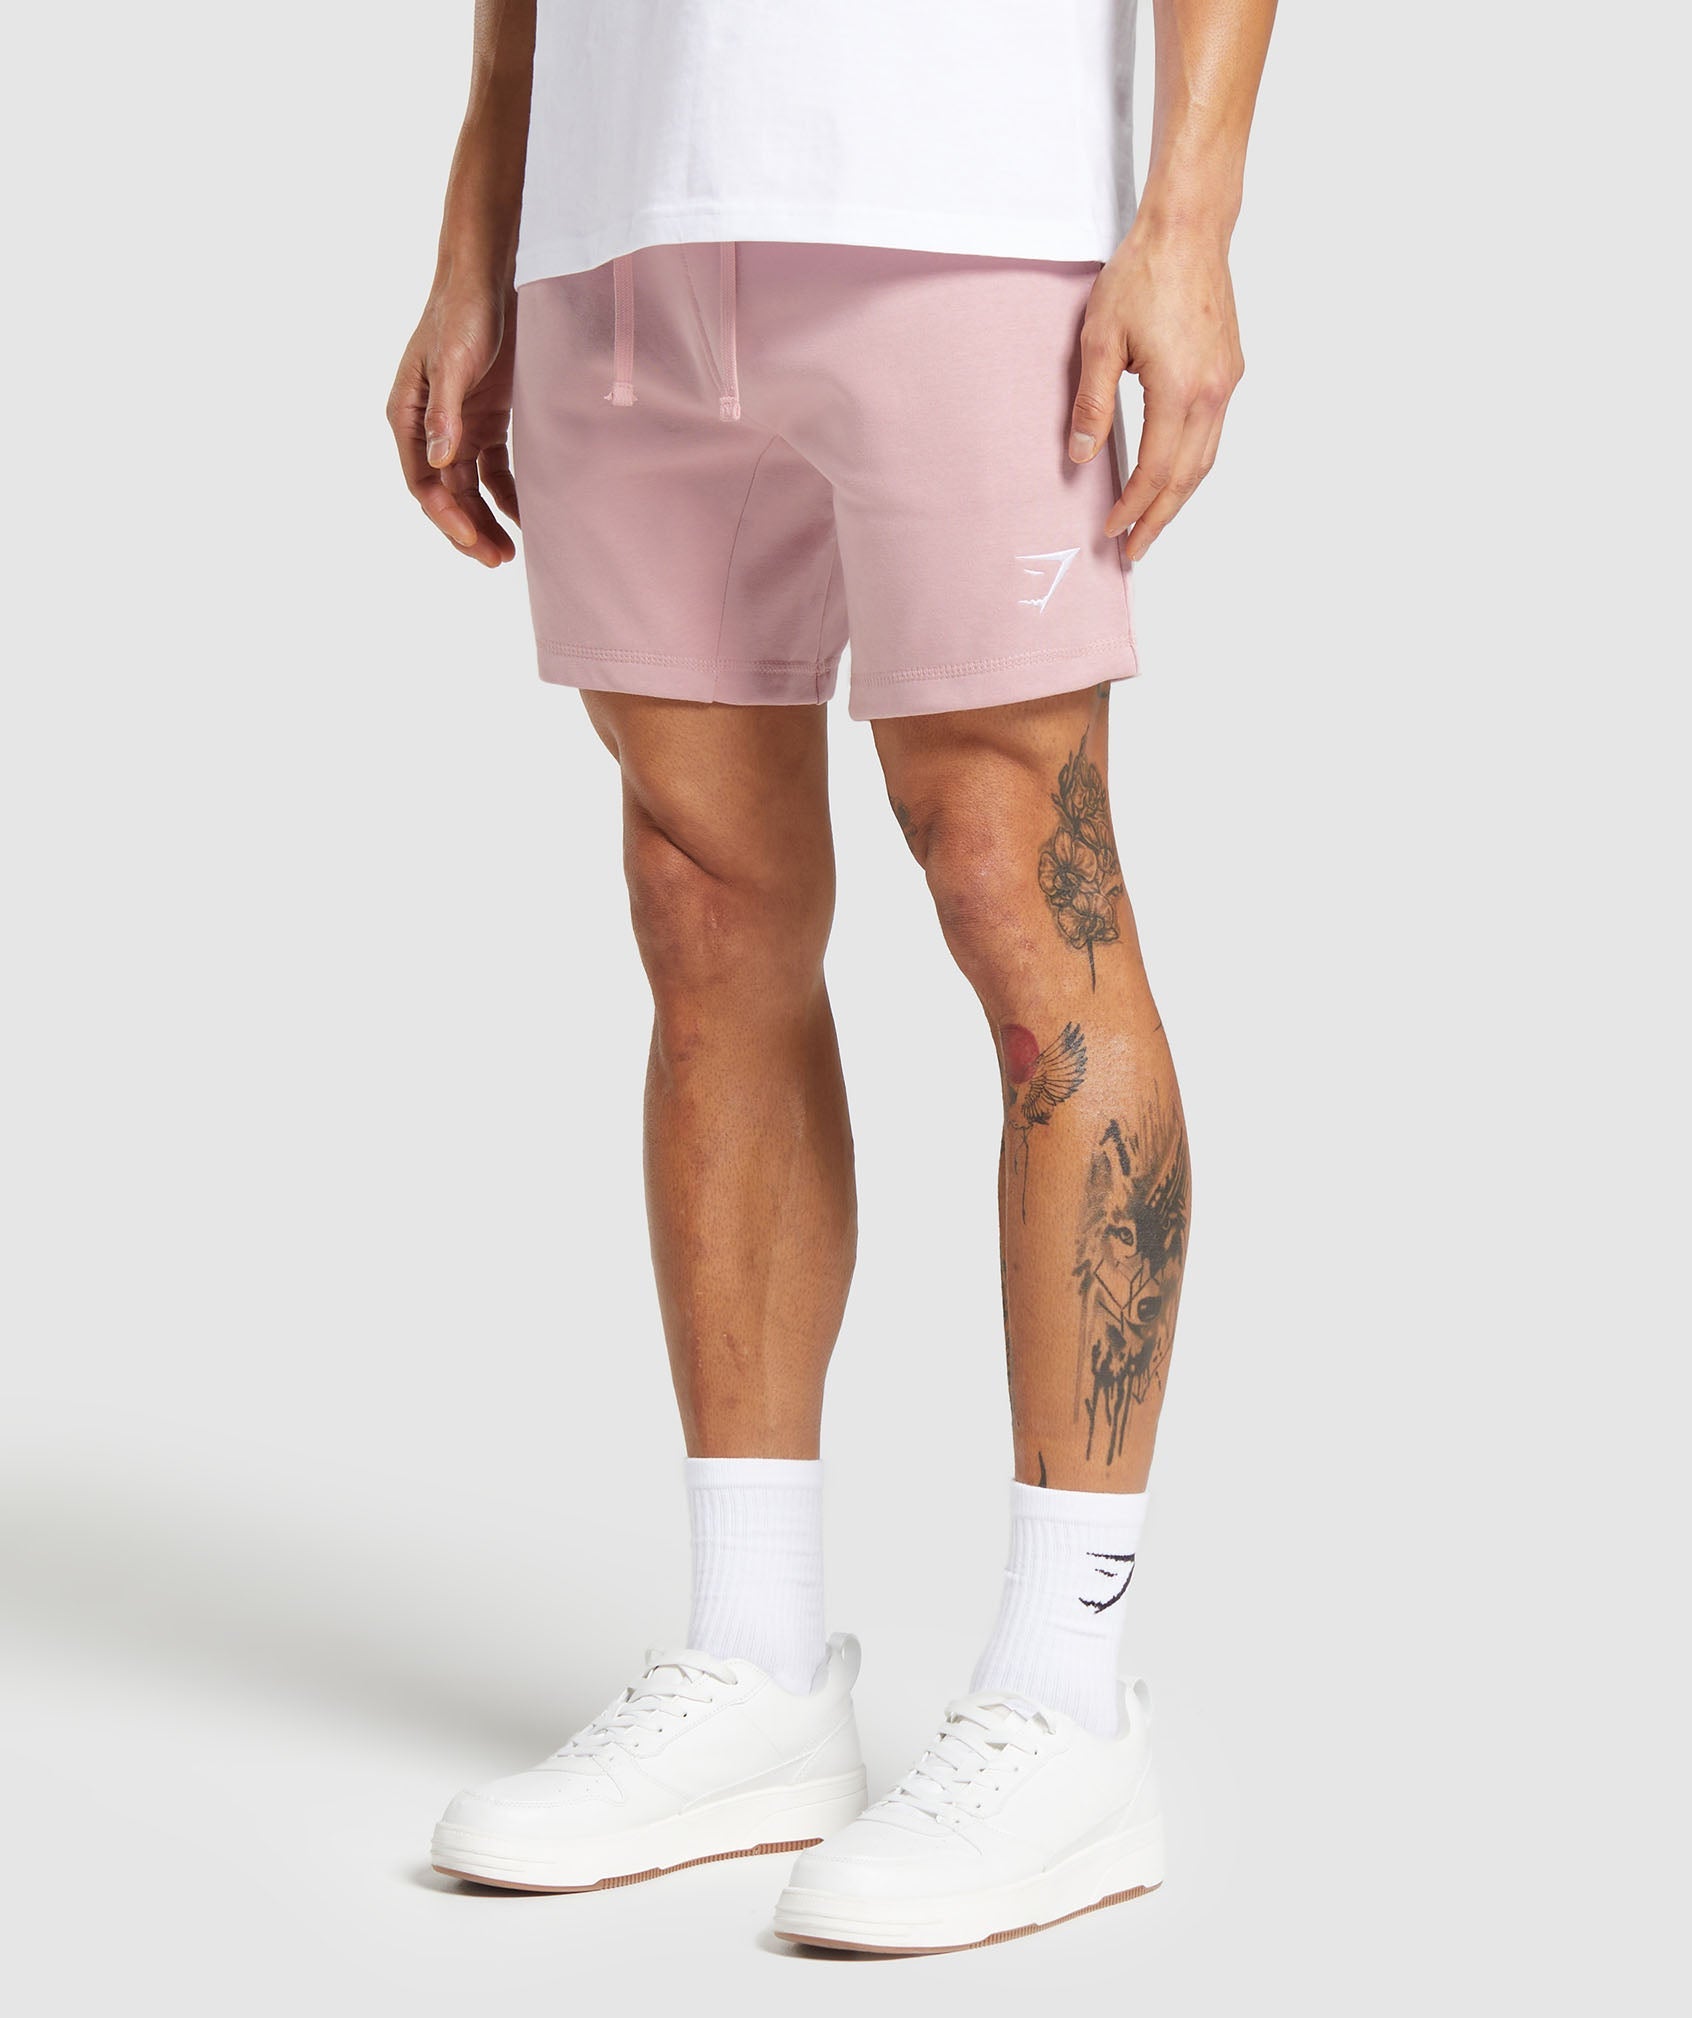 Crest 7" Shorts in Light Pink - view 3